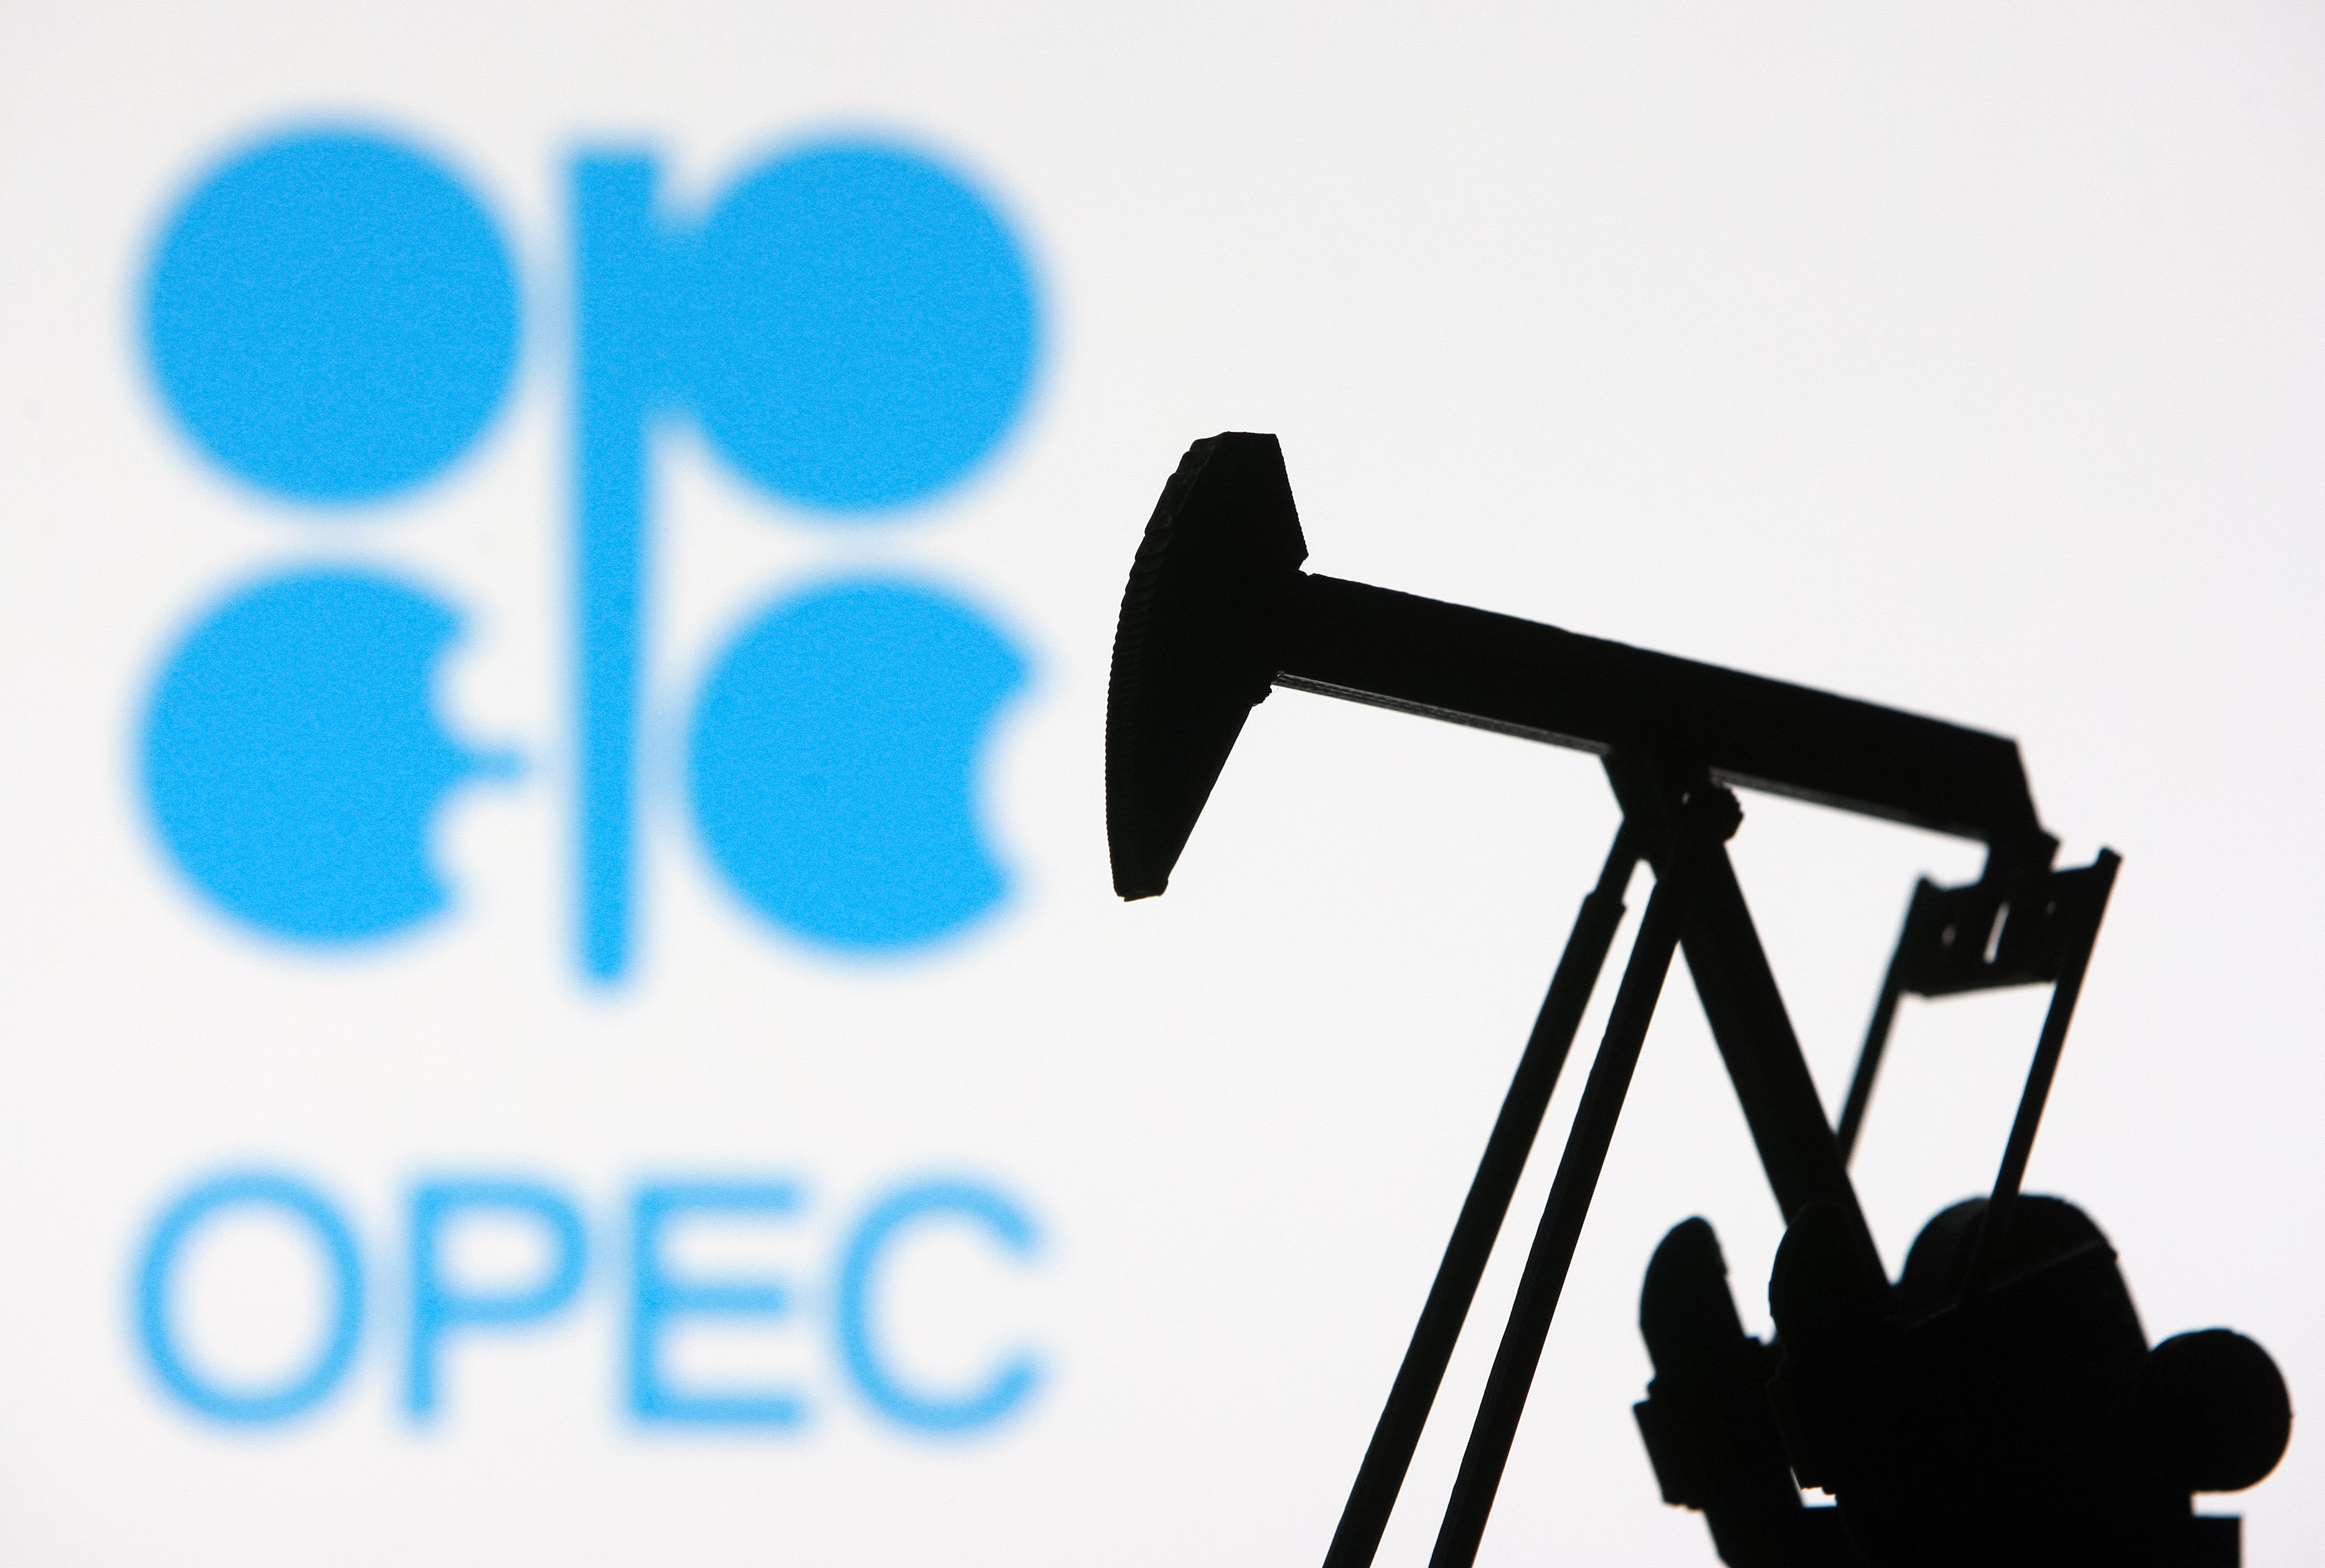 Oil prices remain stable in face of OPEC+ supply reduction, weakening currency